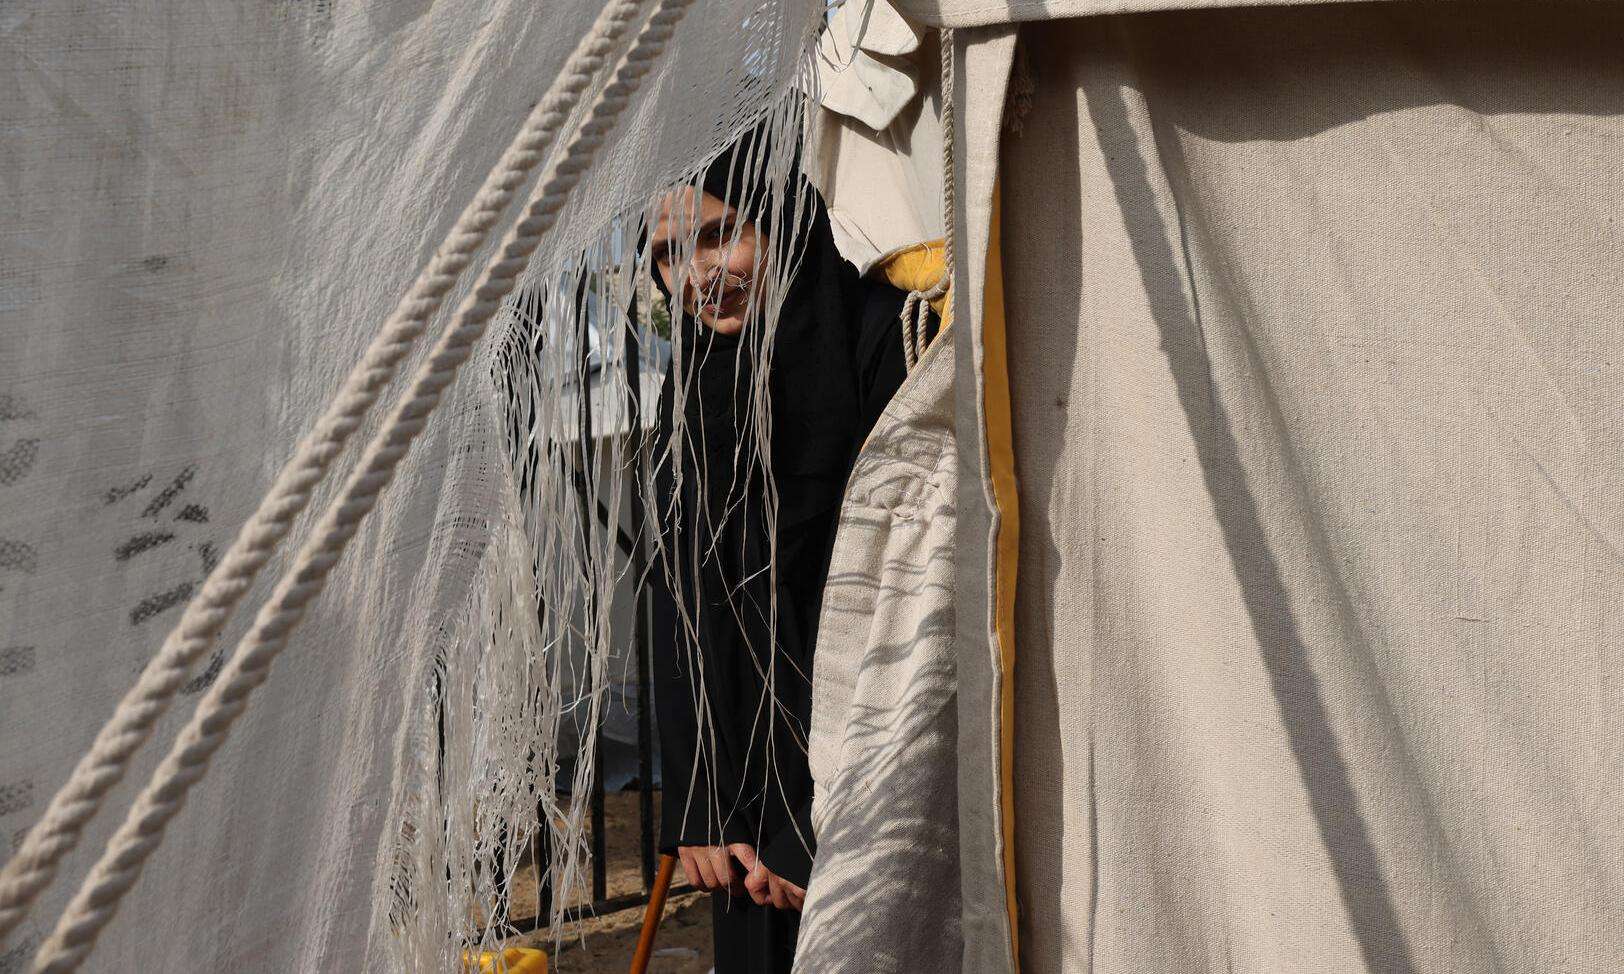 A Palestinian woman seen through the folds of a makeshift tent in the Rafah area, southern Gaza.